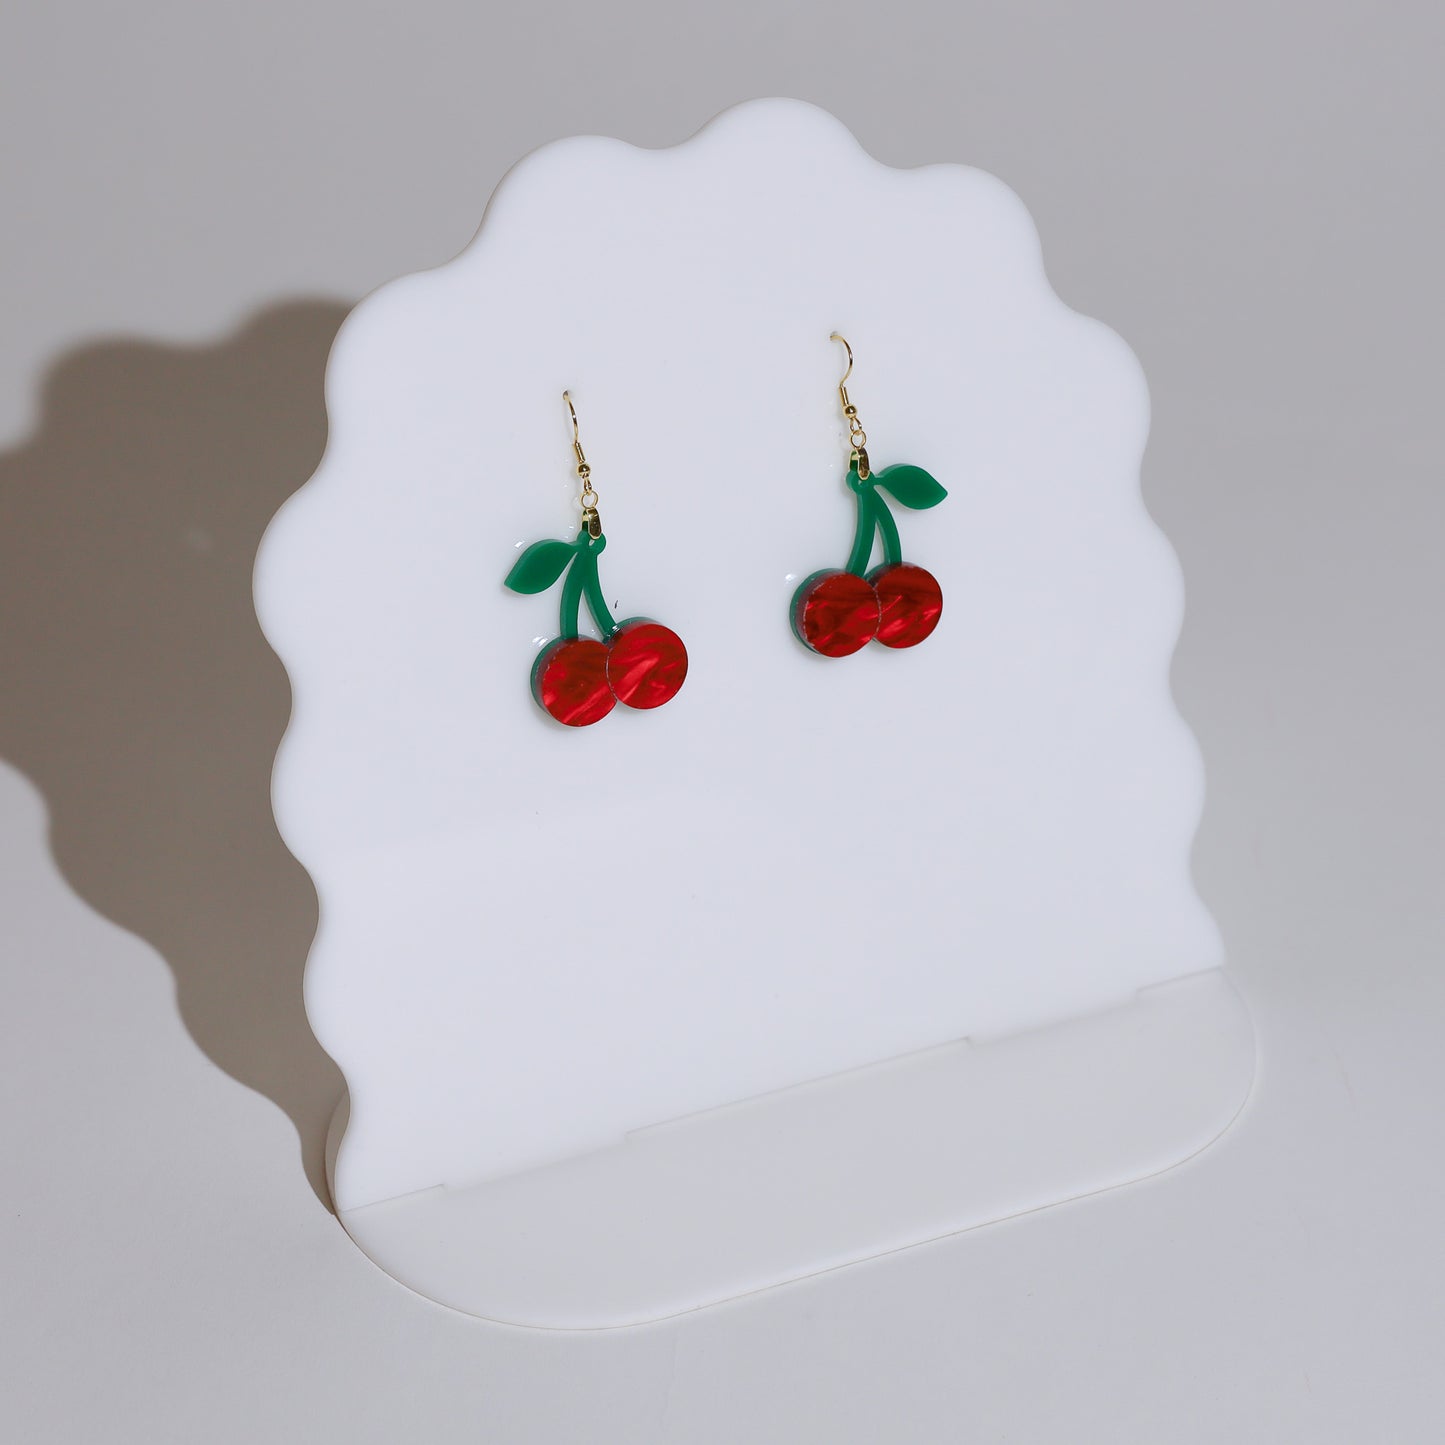 cherry earrings made by Our Family Design